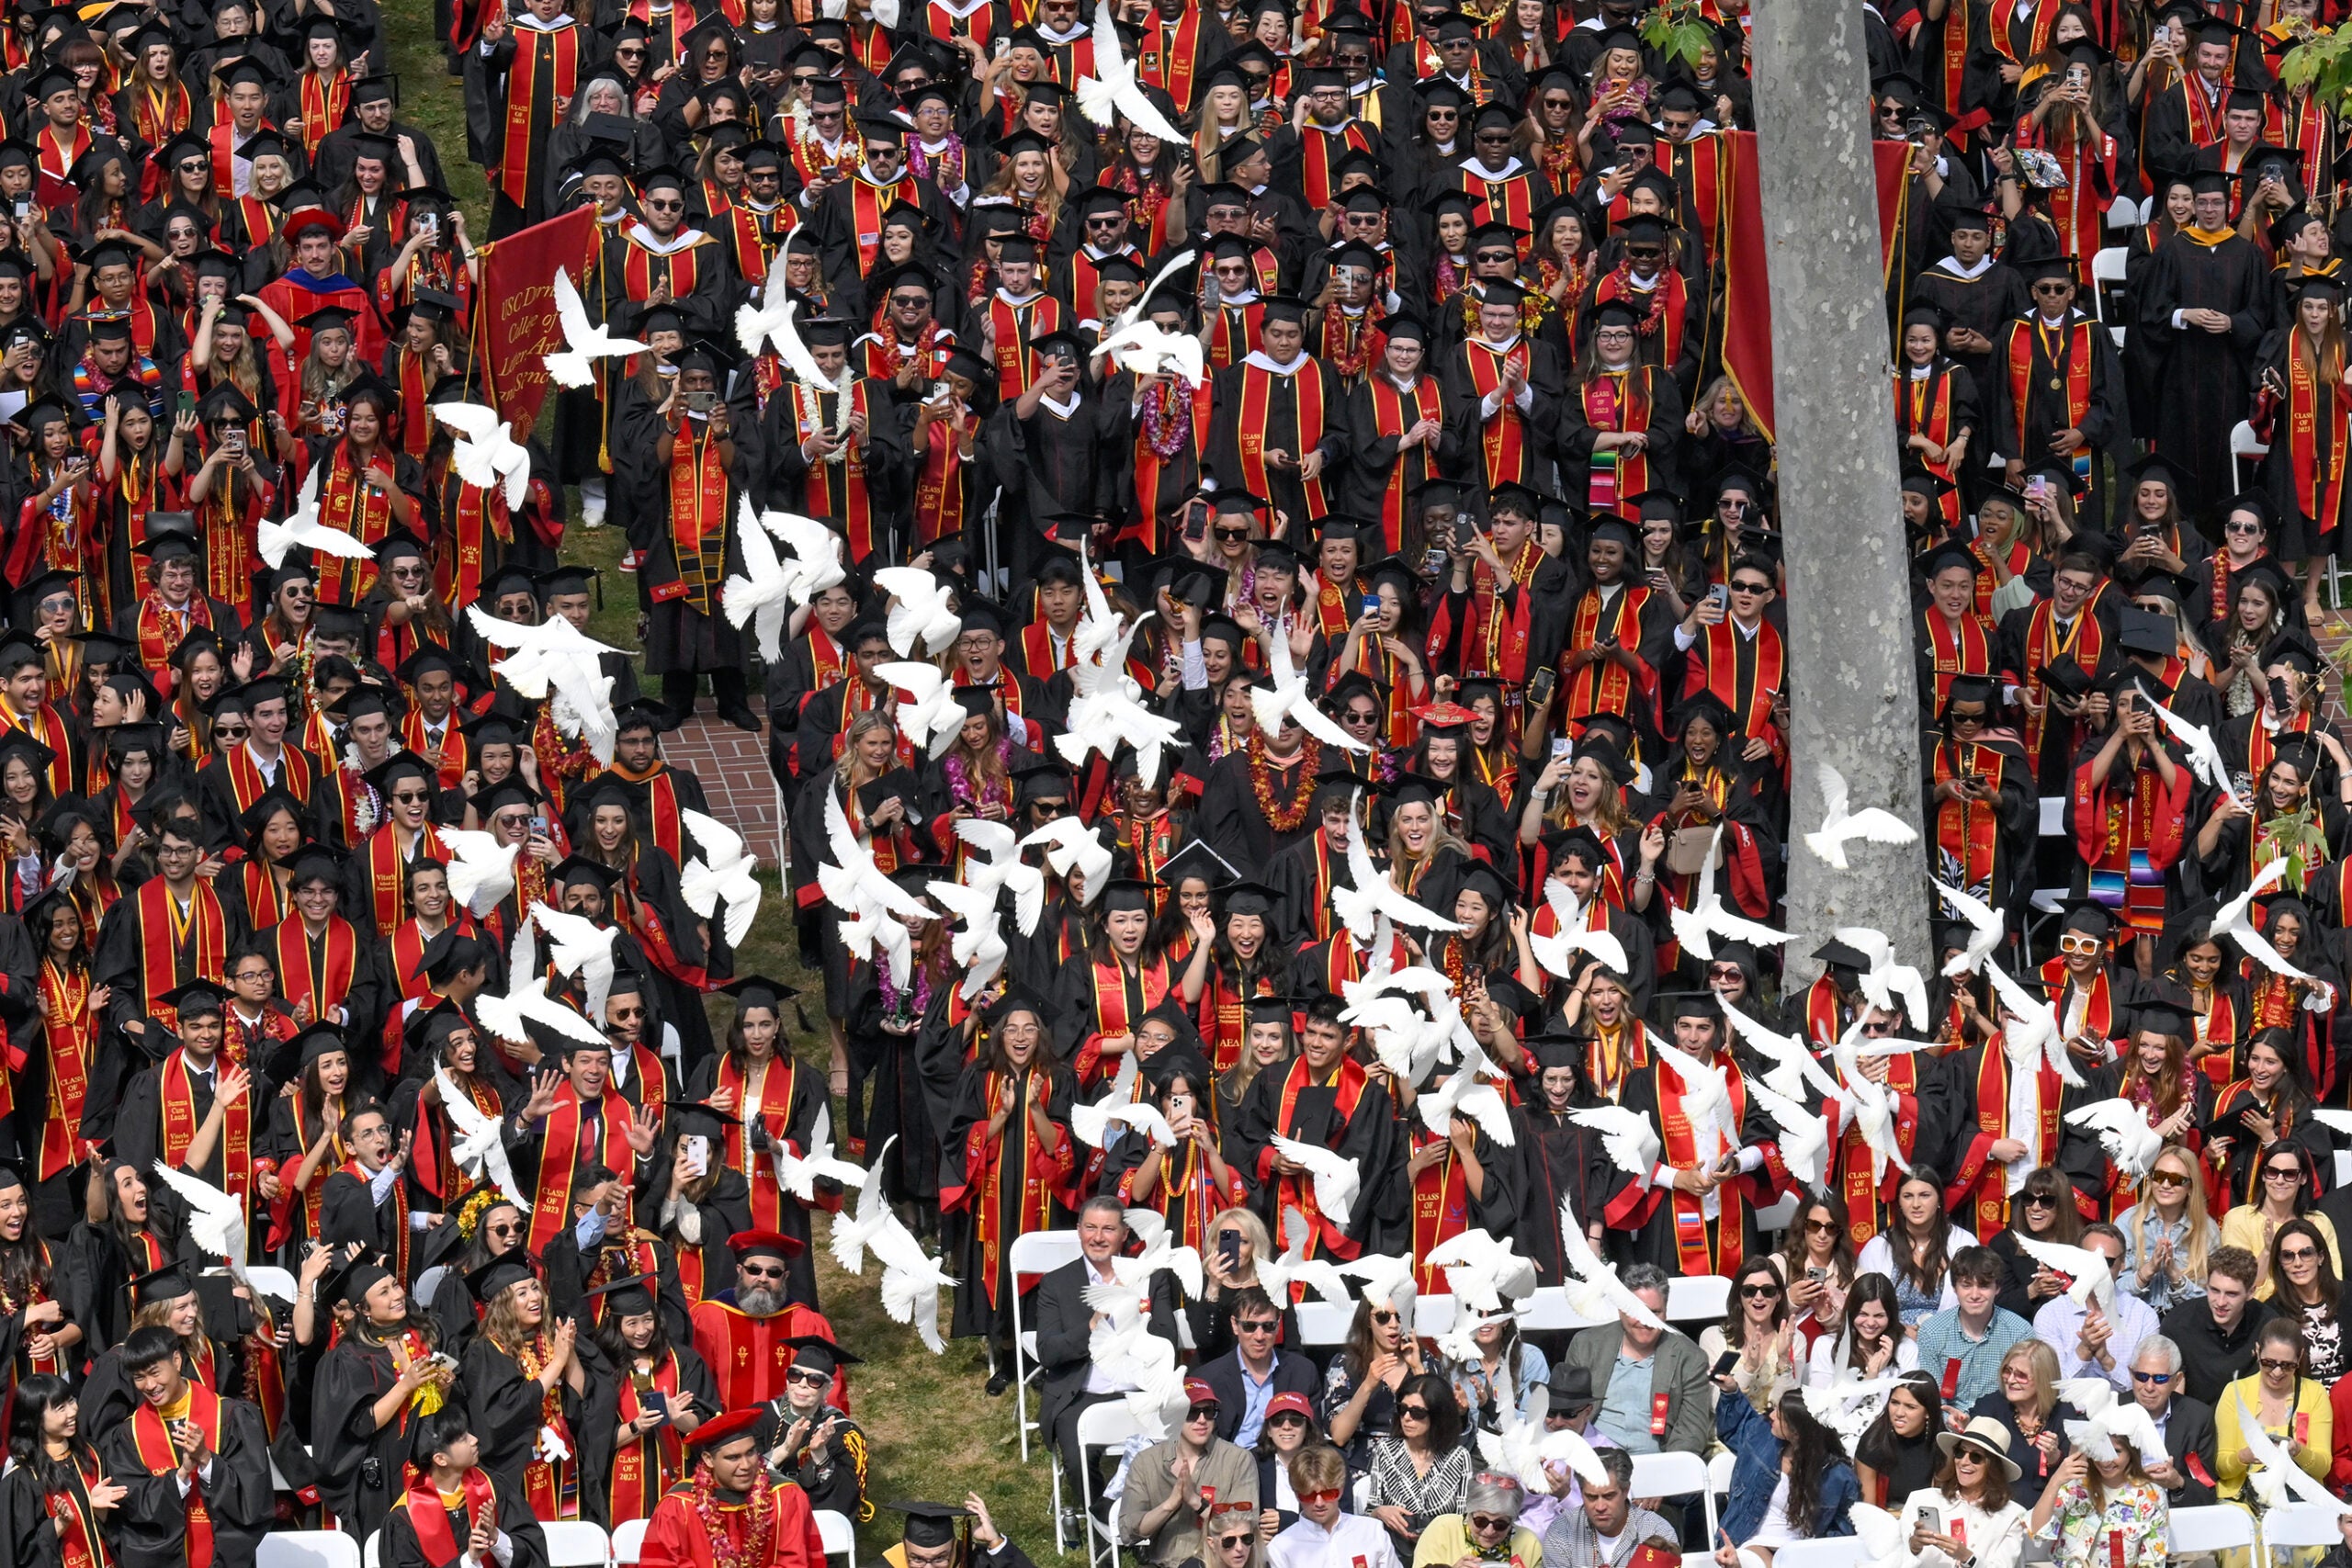 Doves are released at the conclusion of the 140th commencement ceremony at the University of Southern California, May 12, 2023. (Photo/Gus Ruelas)